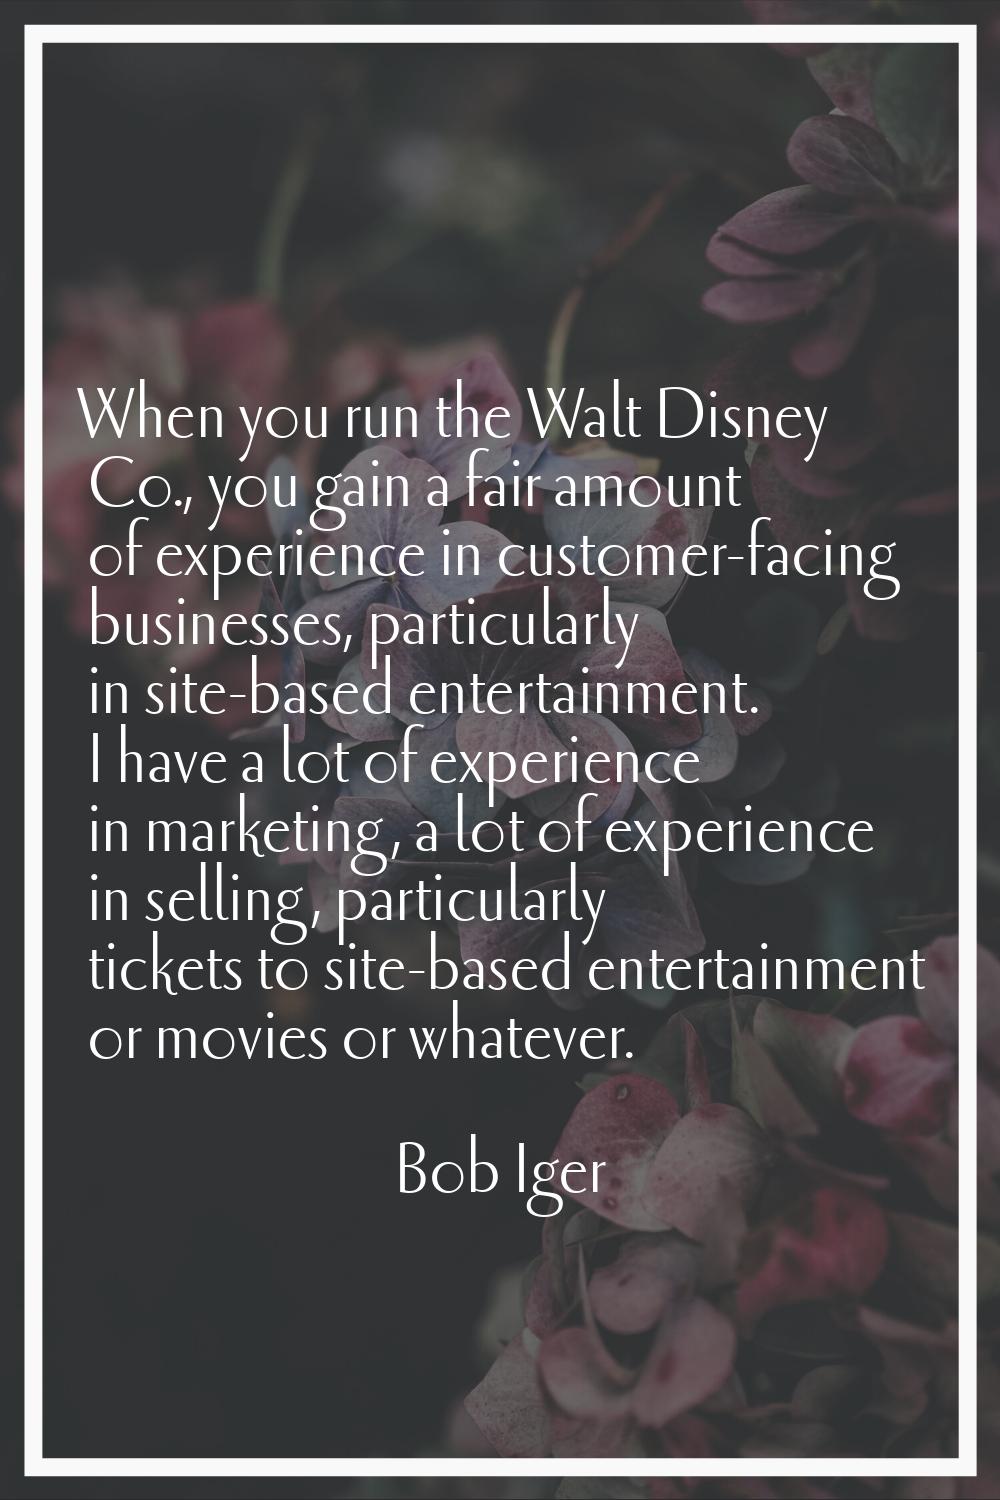 When you run the Walt Disney Co., you gain a fair amount of experience in customer-facing businesse